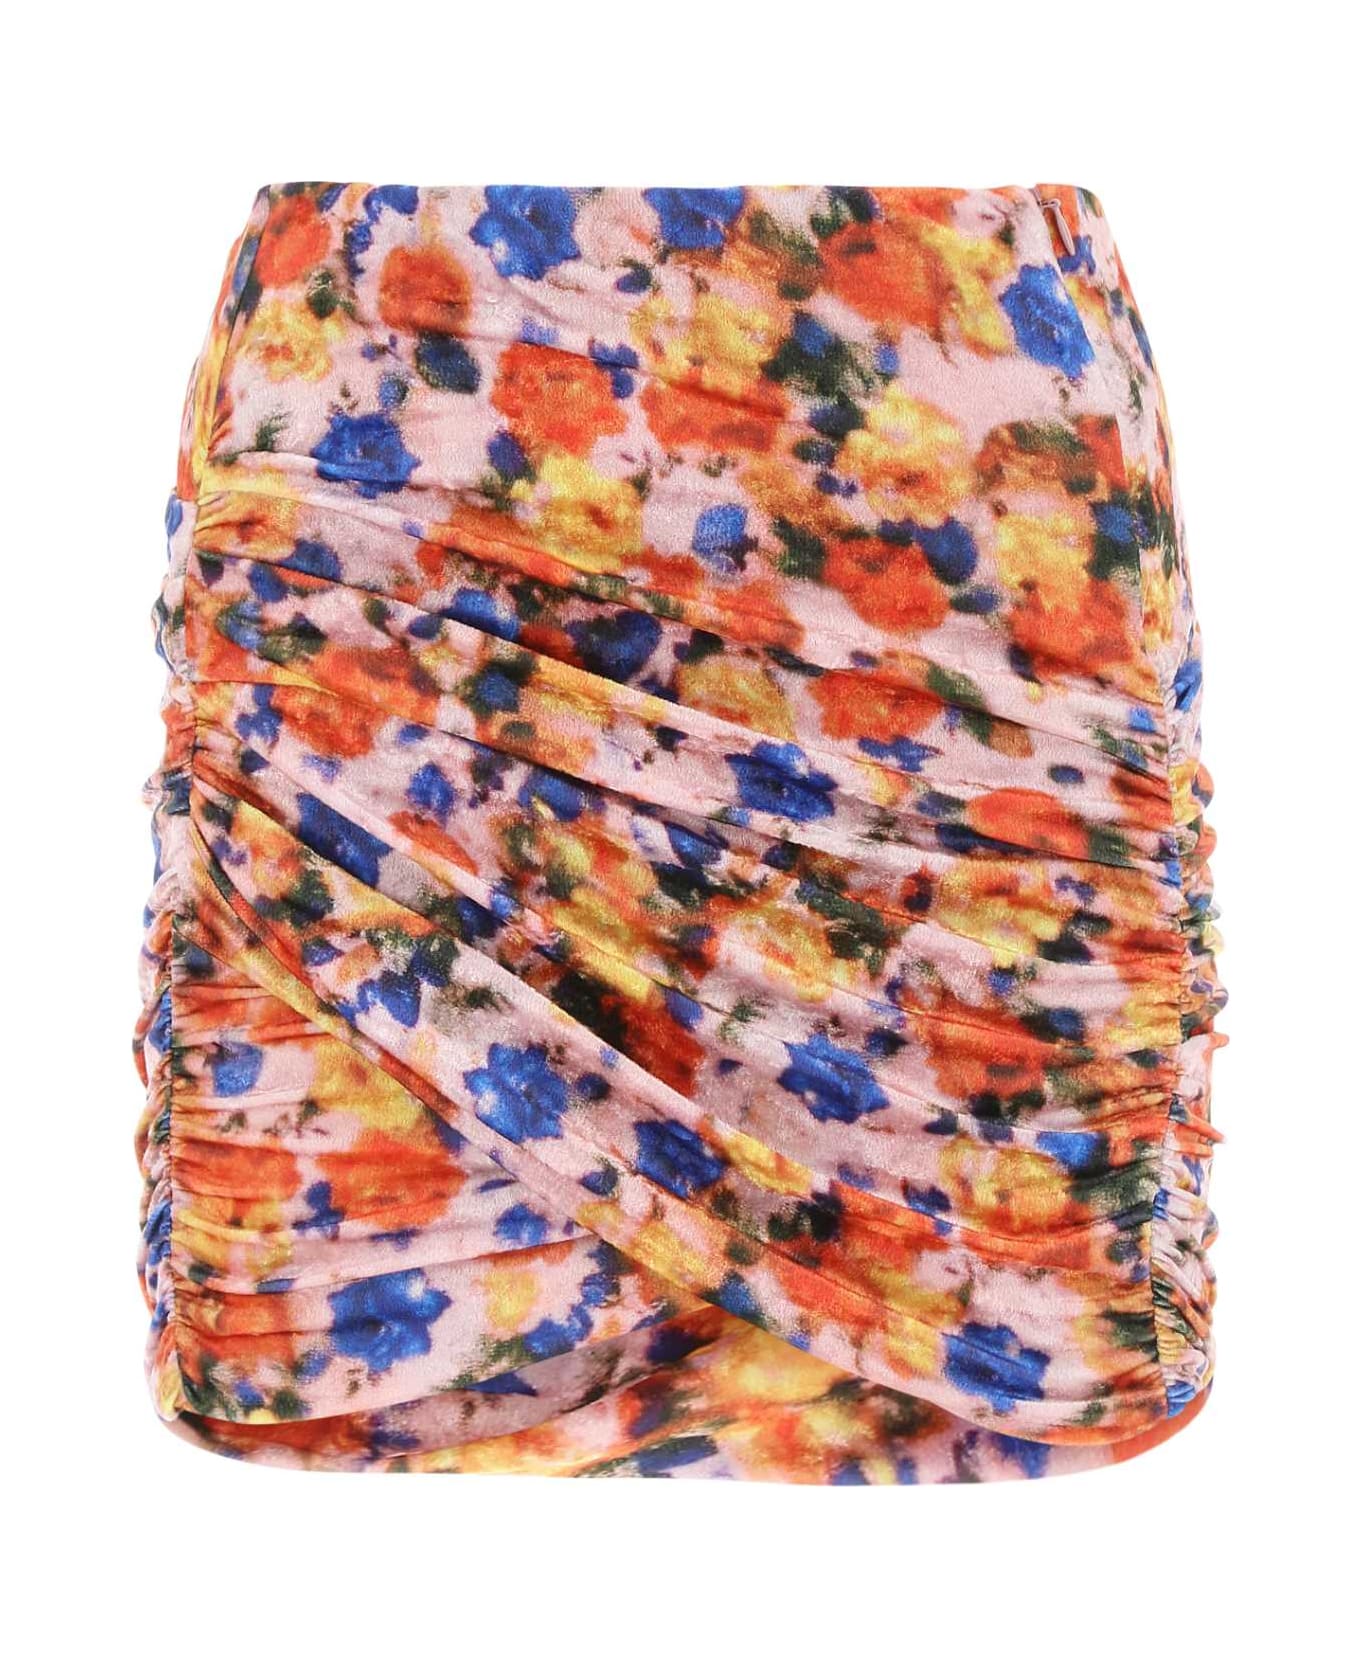 Isabel Marant Printed Chenille Guilayo Mini Skirt - 11OR スカート